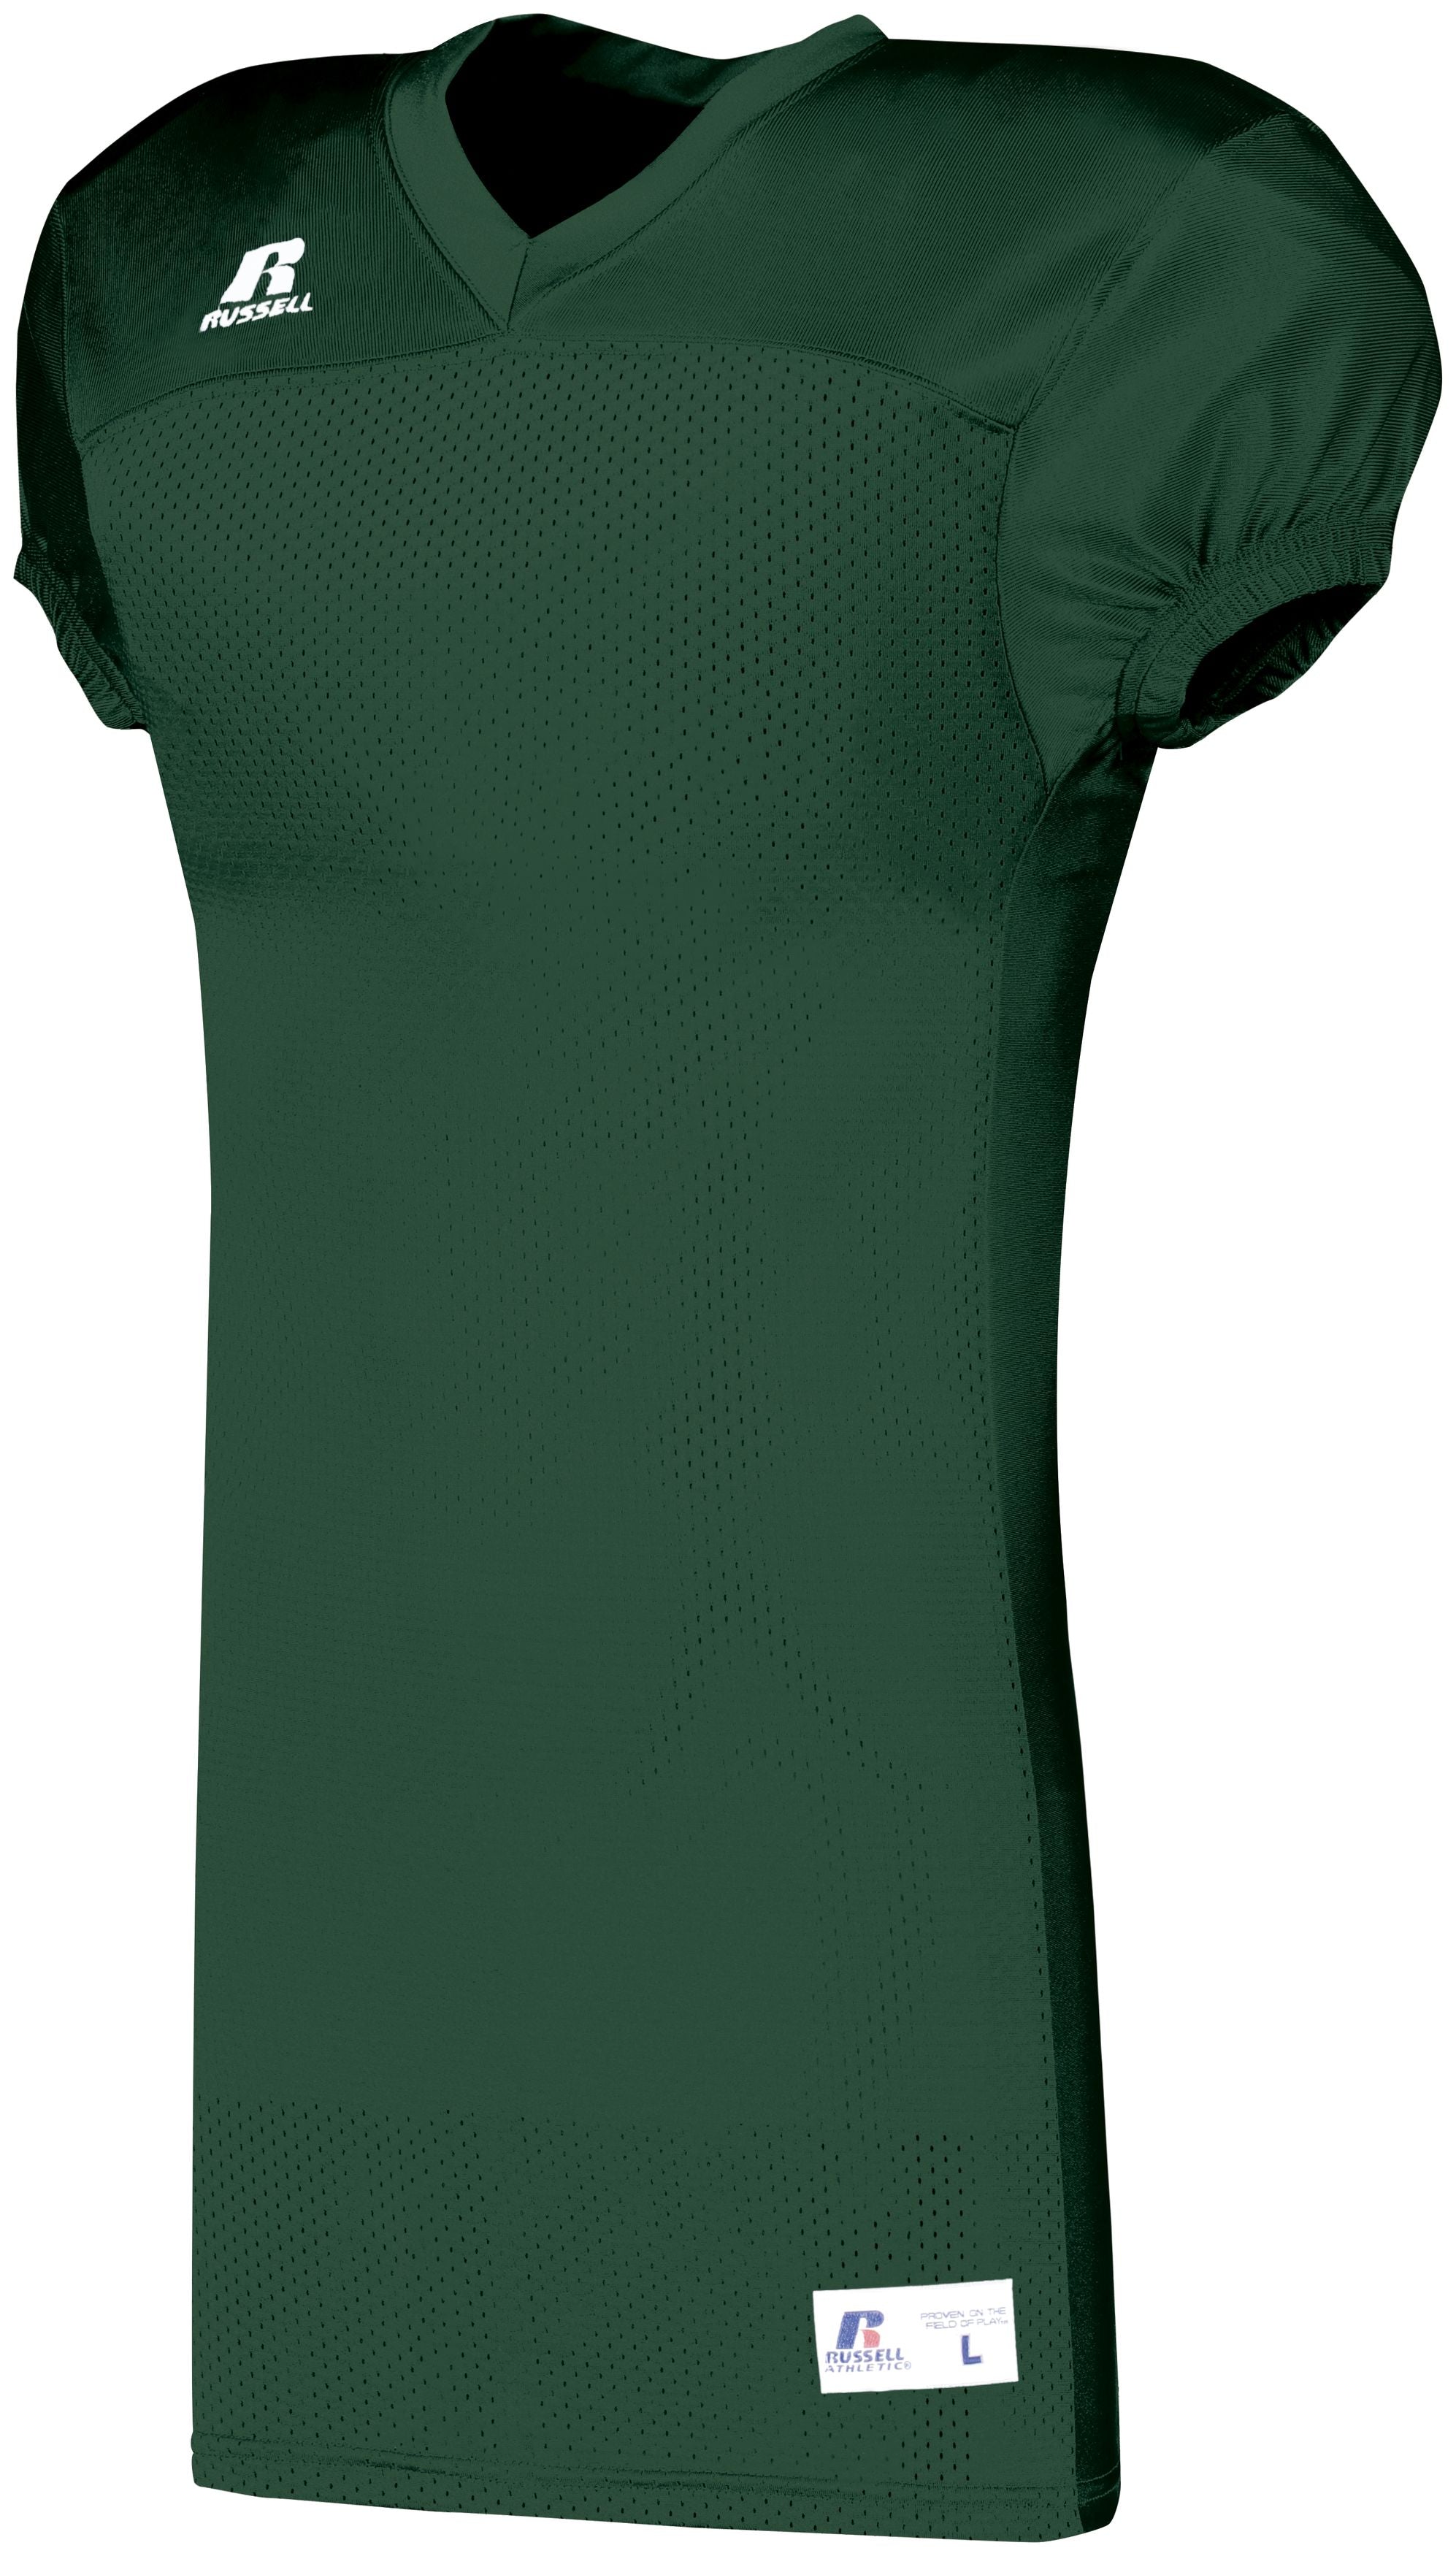 Russell Athletic Youth Solid Jersey With Side Inserts in Dark Green  -Part of the Youth, Youth-Jersey, Football, Russell-Athletic-Products, Shirts, All-Sports, All-Sports-1 product lines at KanaleyCreations.com